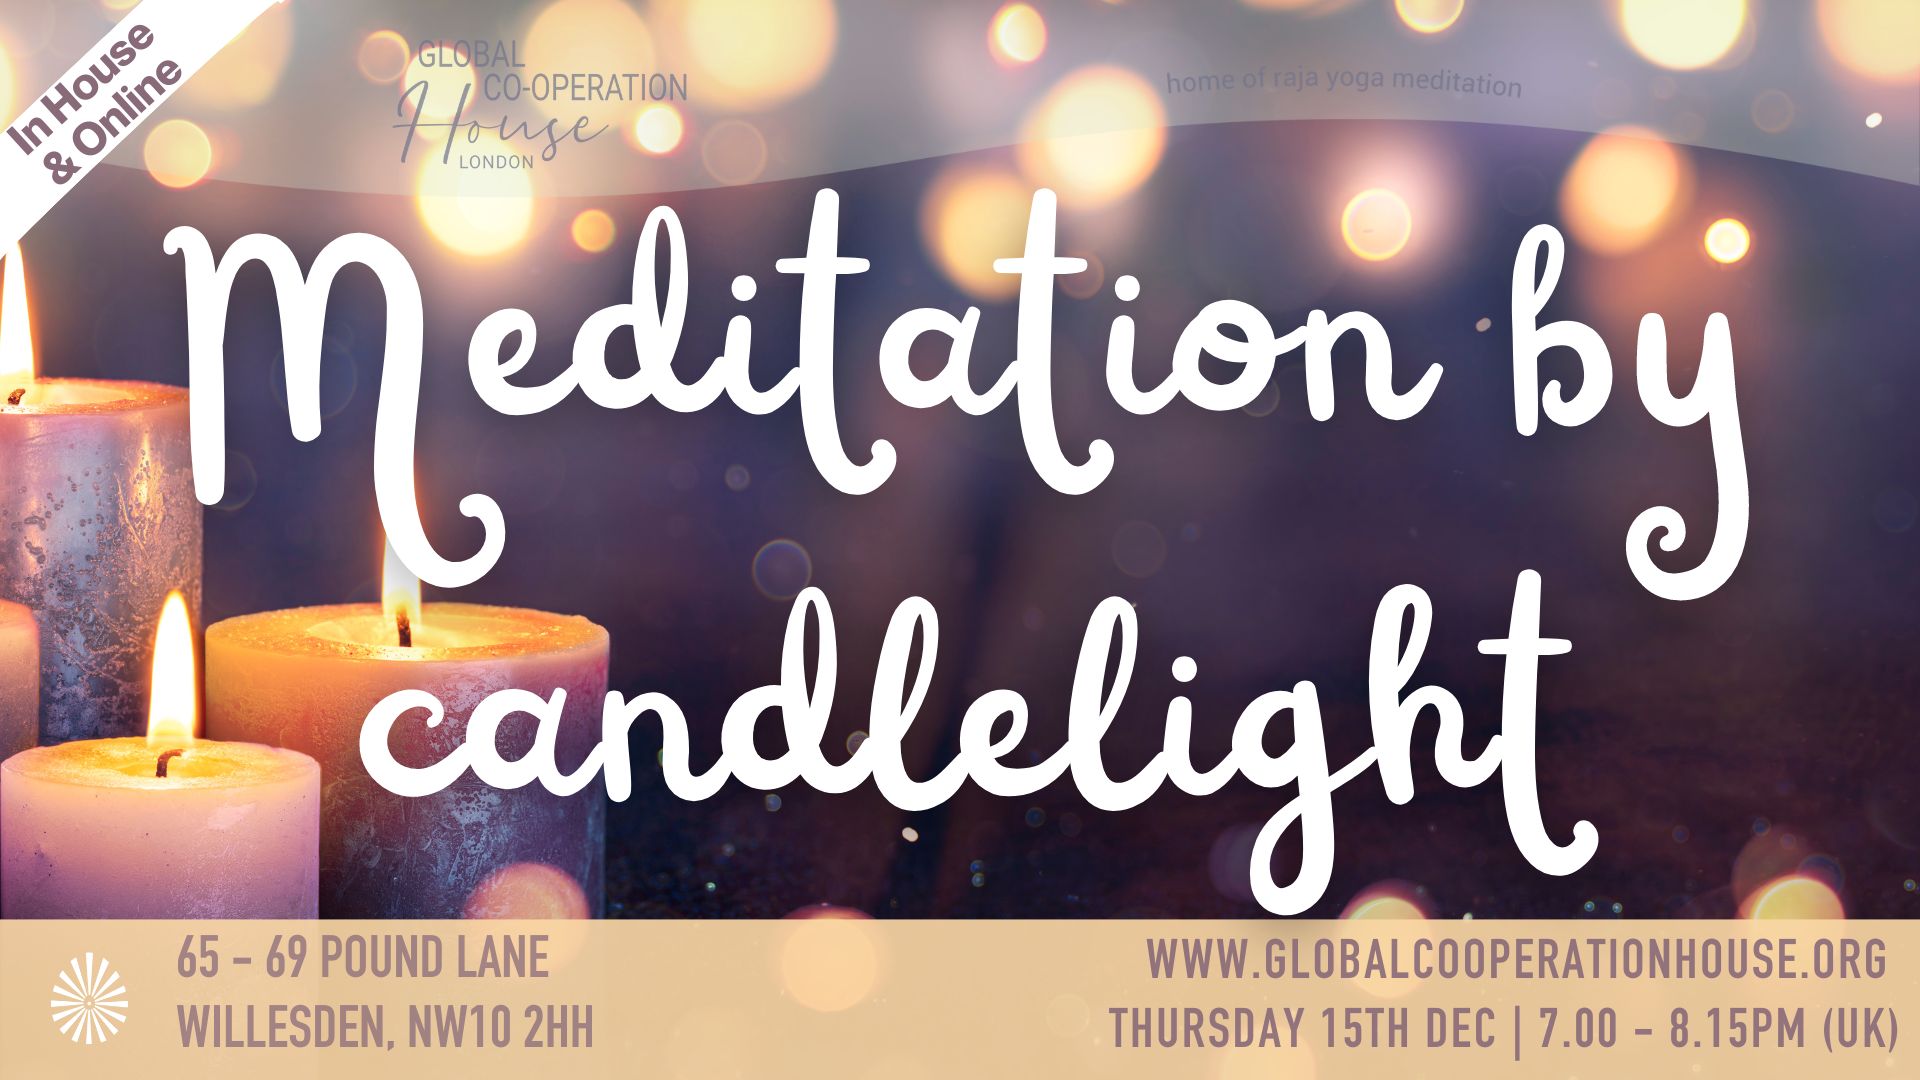 Thursday evening special inhouse event: Meditation by Candlelight